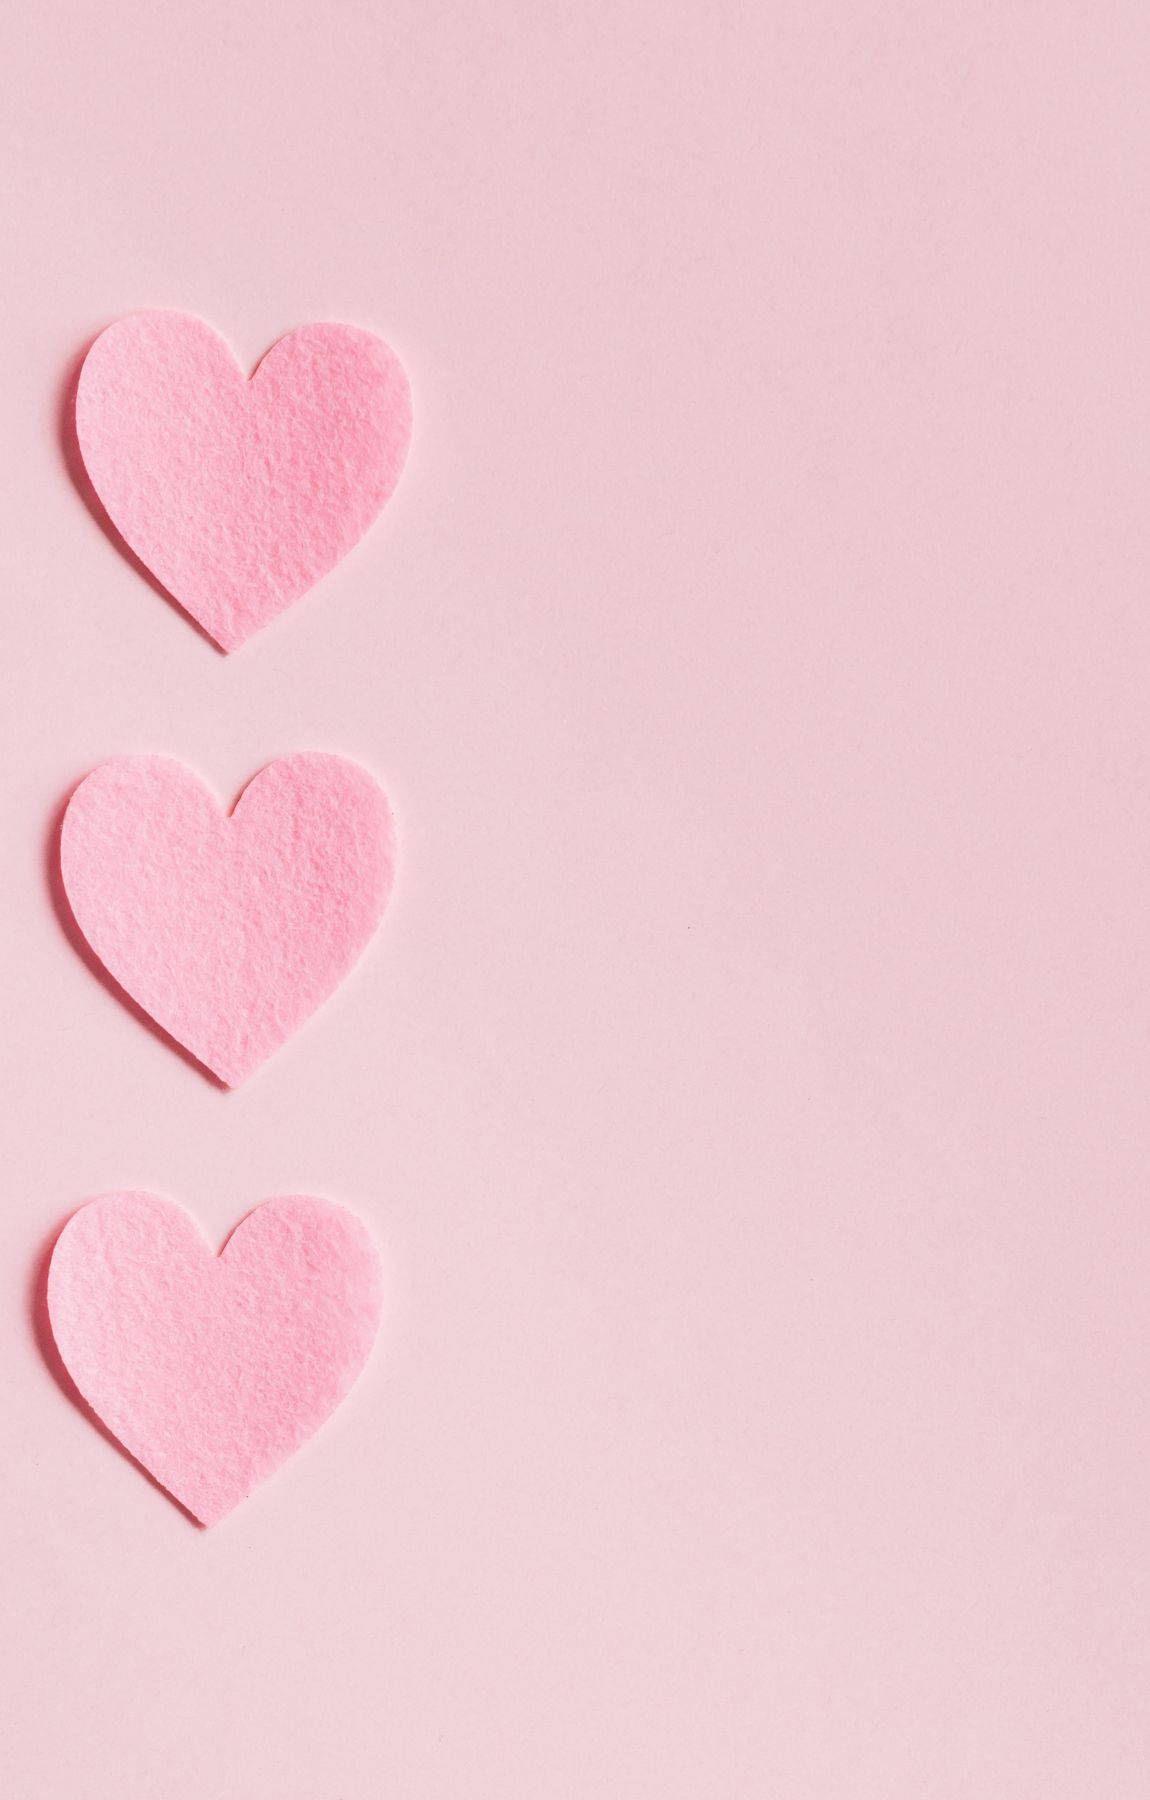 Details 300 aesthetic pink heart background 